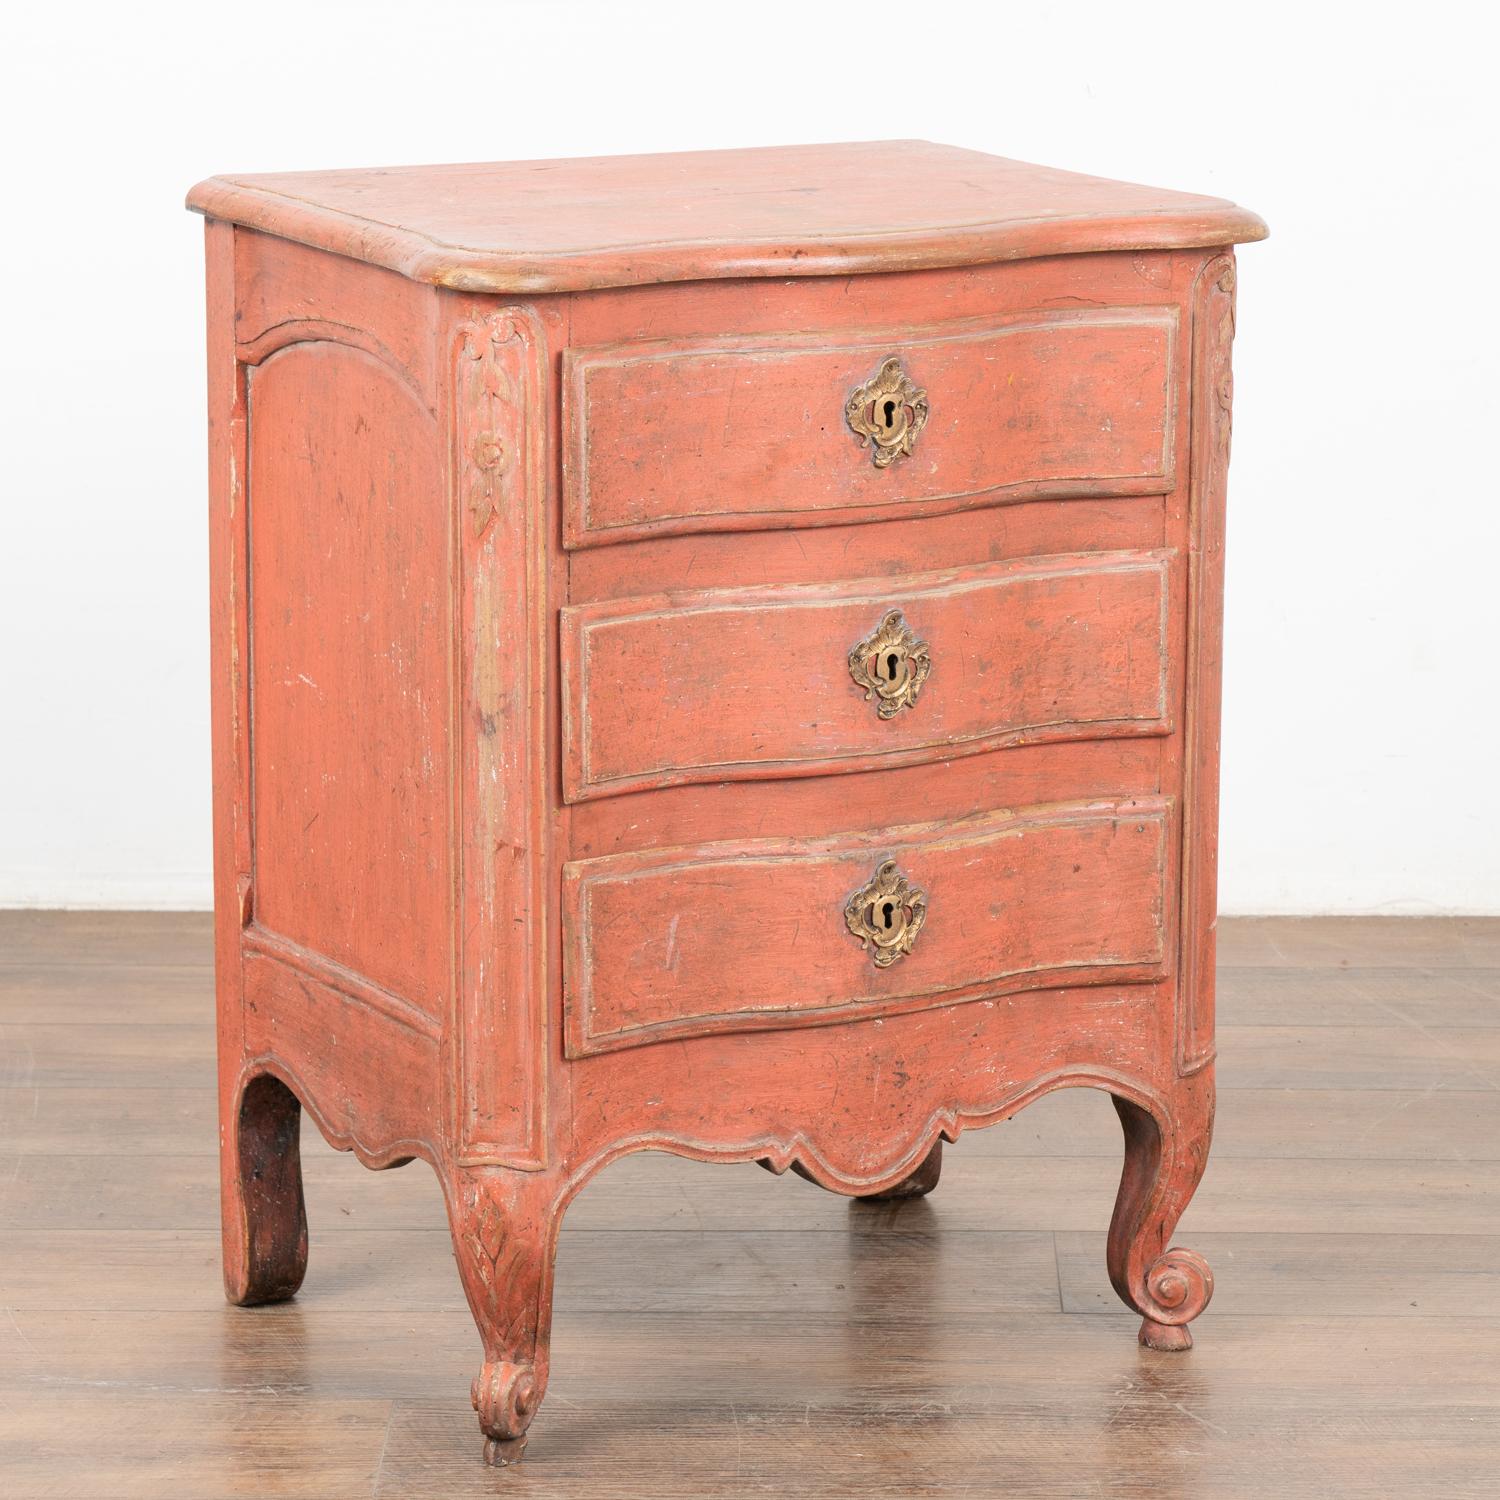 A small oak rococo chest of three drawers with brass key escutcheons. The scalloped edge is carried down through the 3 drawer fronts and bottom apron resulting in an elegant chest all resting on four elongated cabriole legs.
The newer,